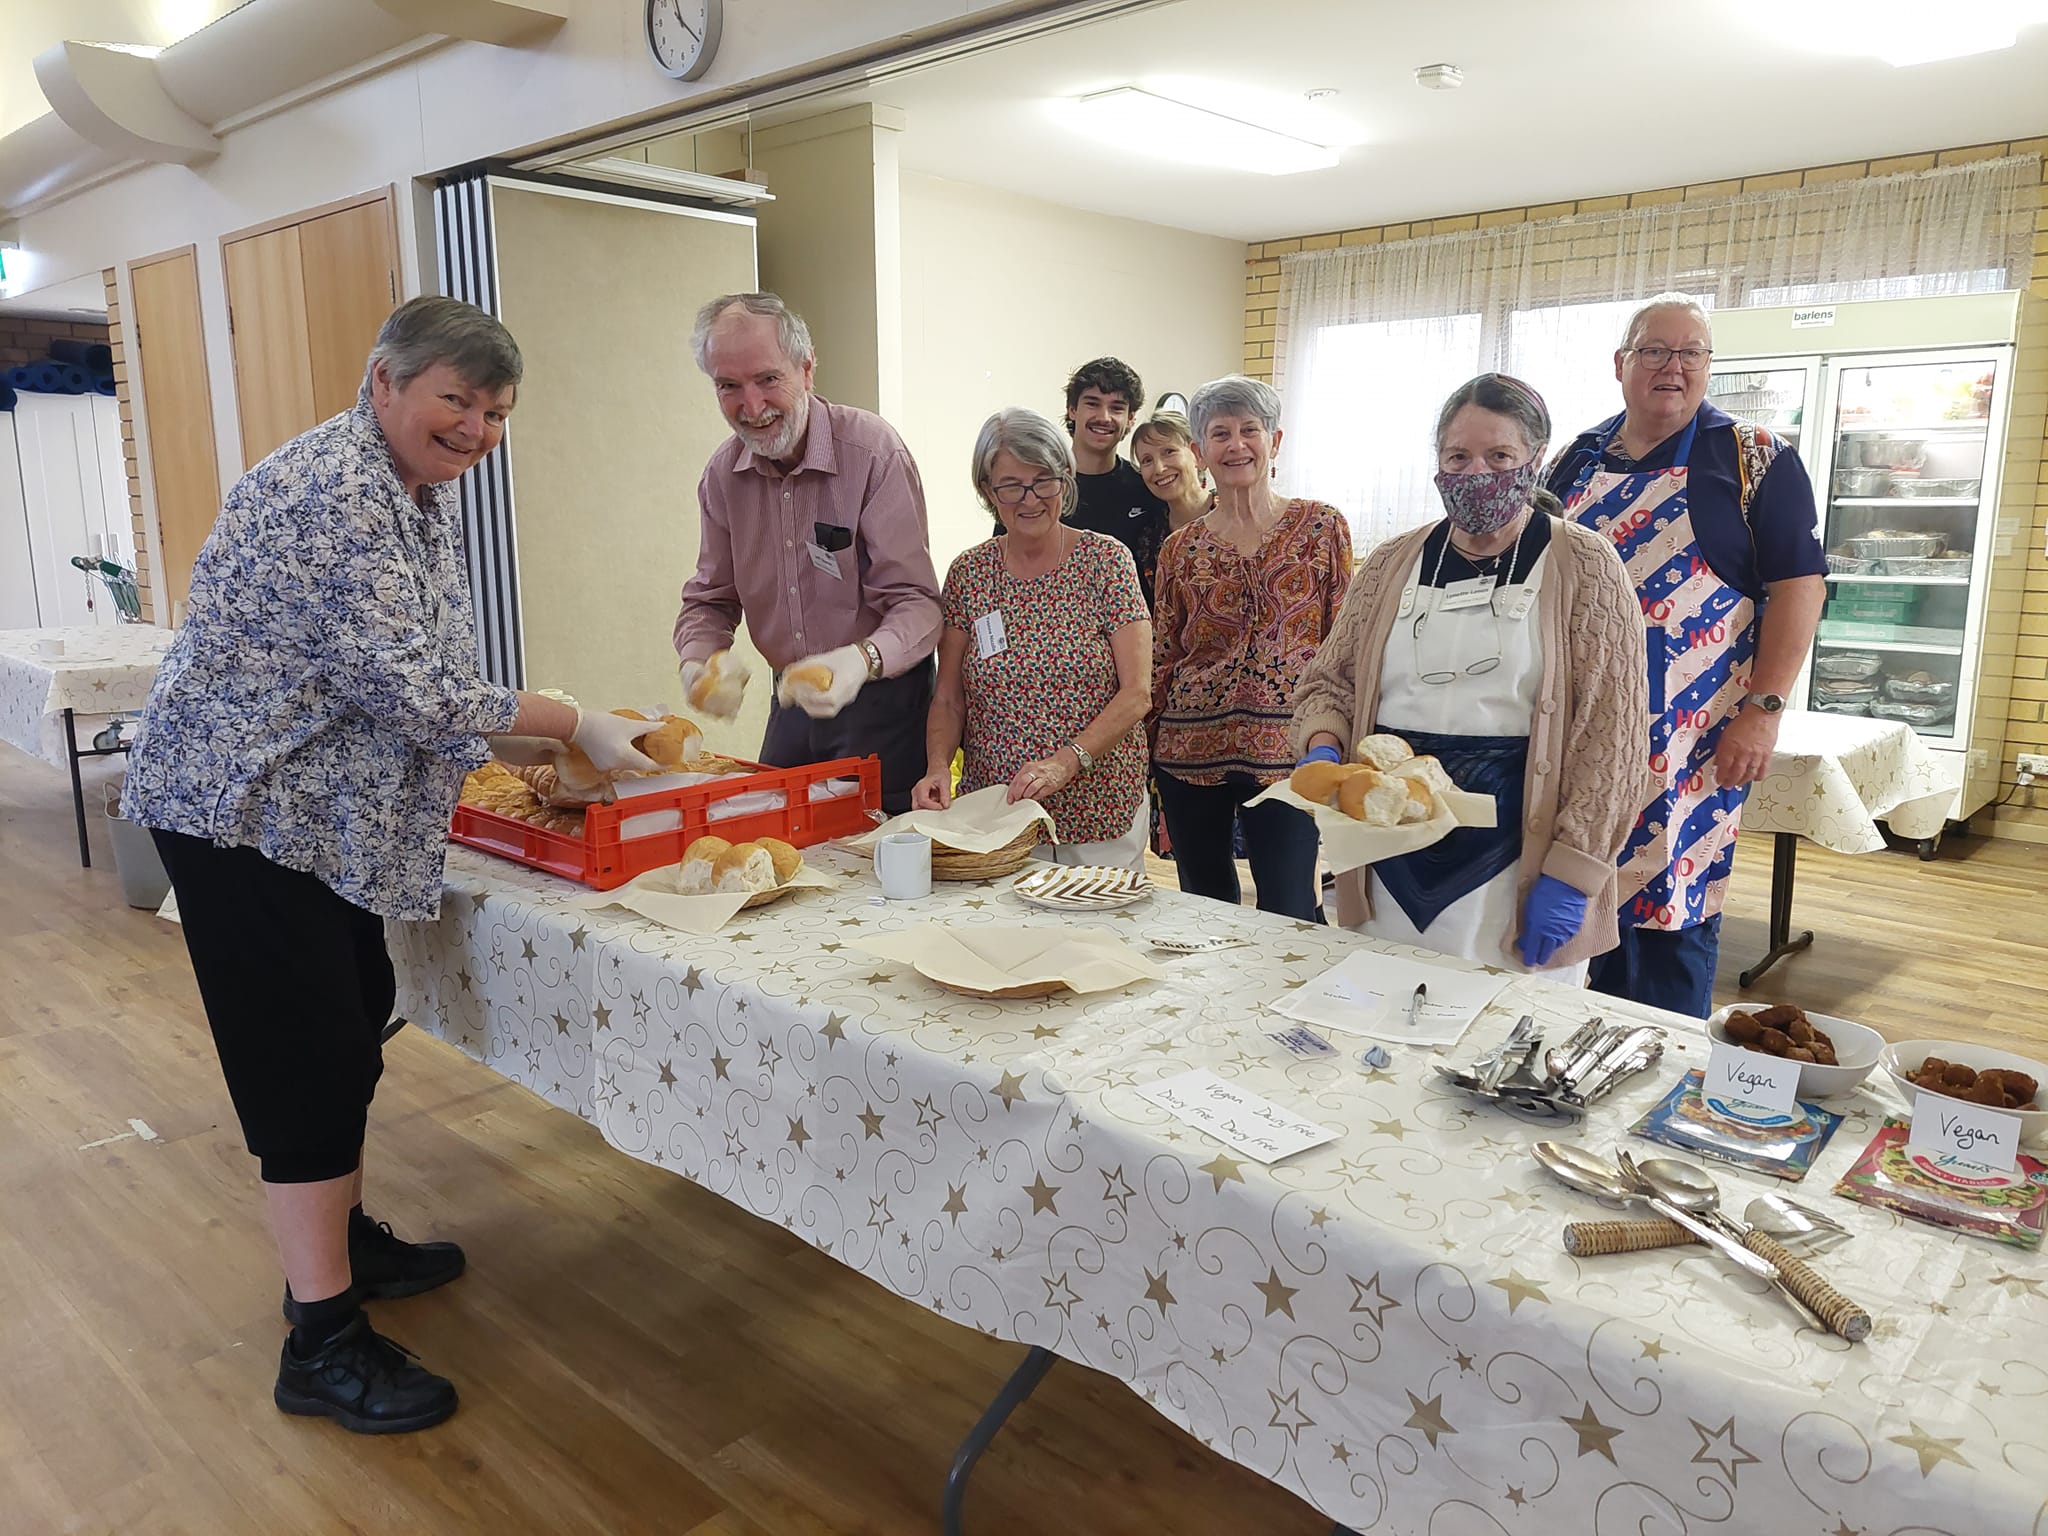 Preparations for the Kippax Uniting Church Christmas lunch.